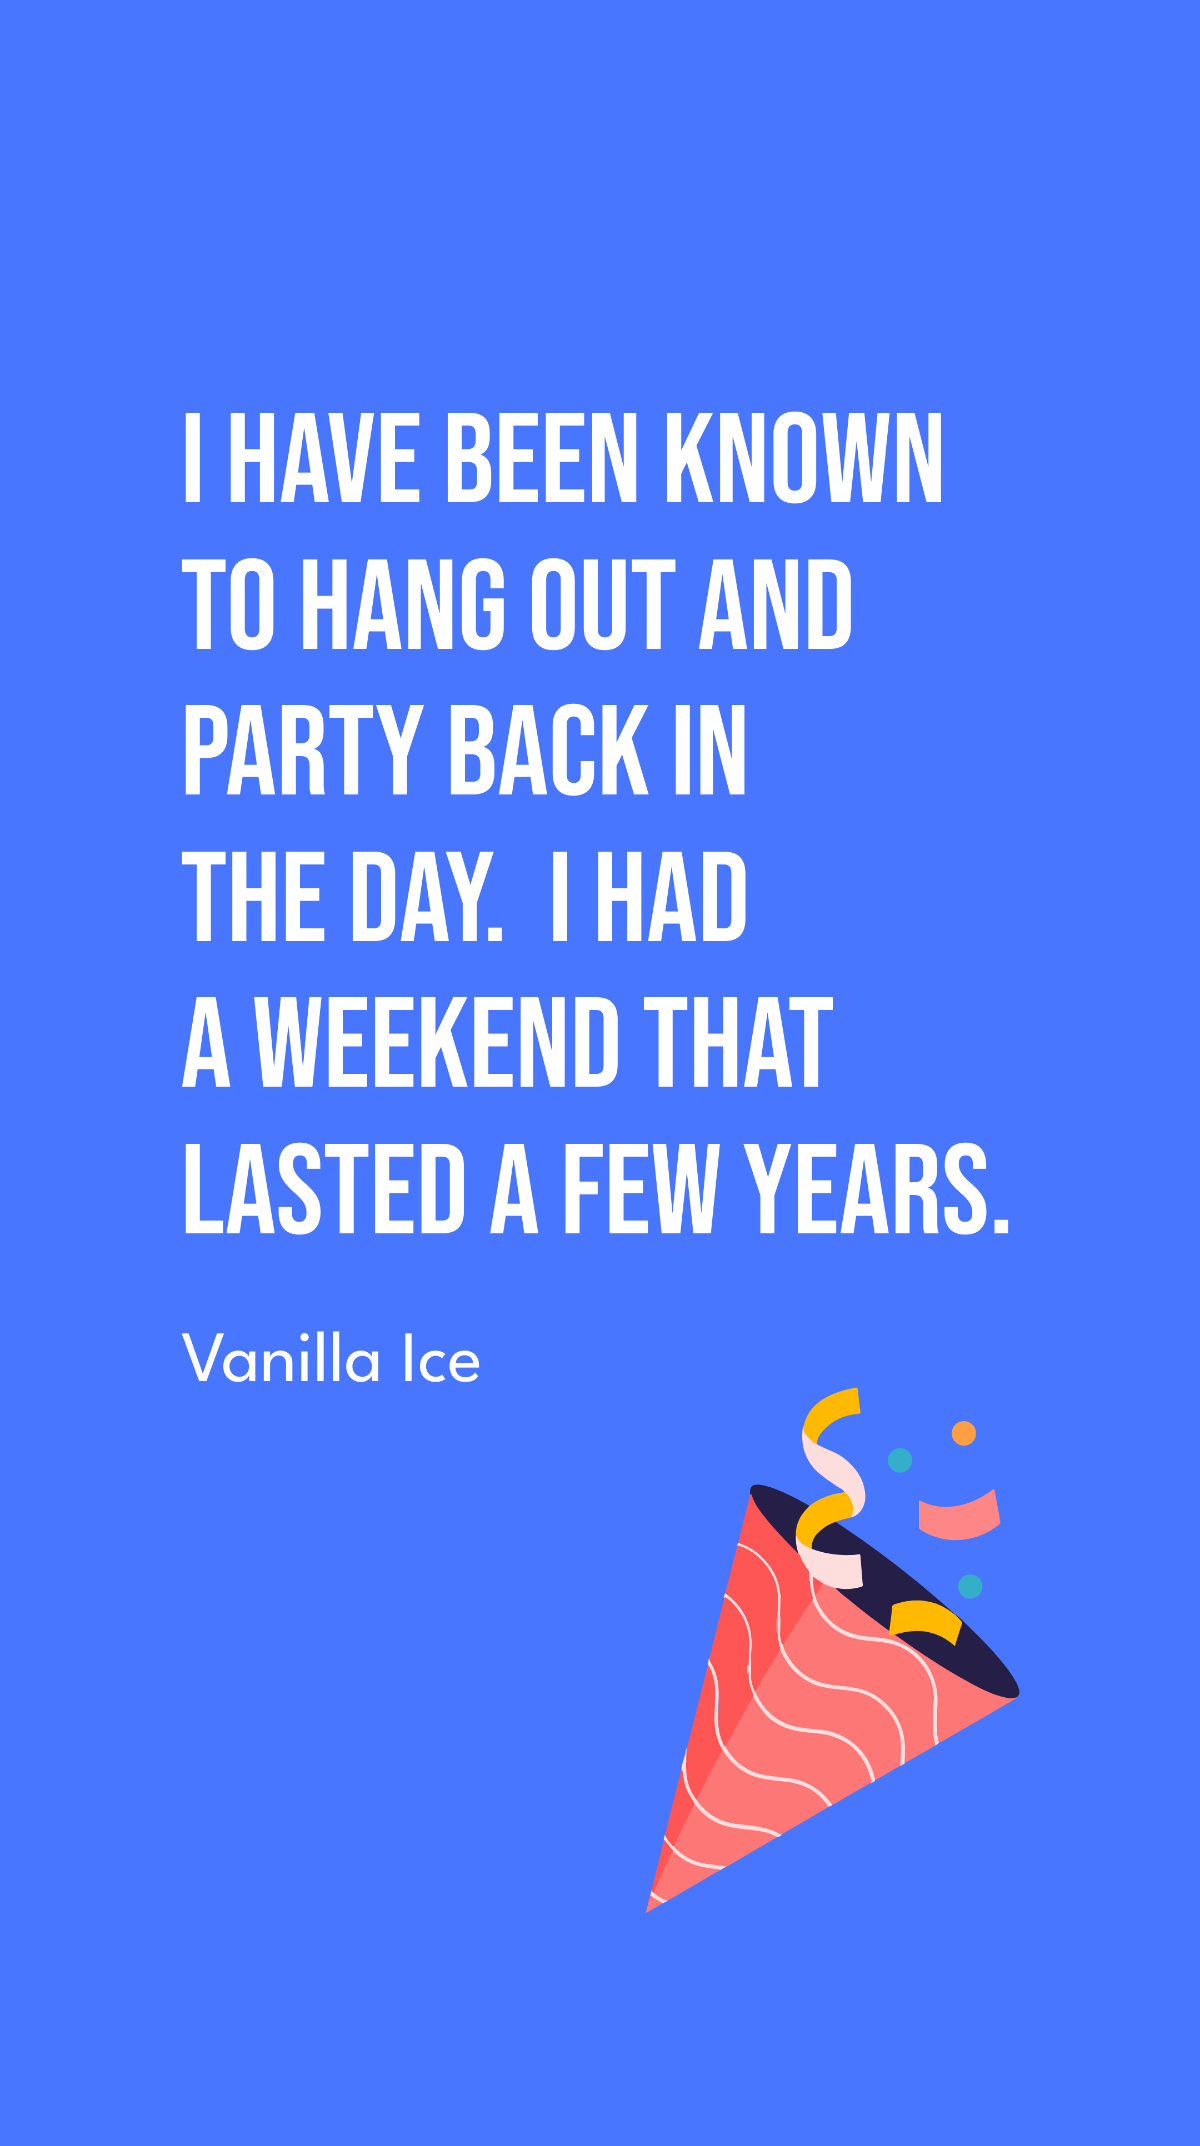 Free Vanilla Ice - I have been known to hang out and party back in the day. I had a weekend that lasted a few years. Template